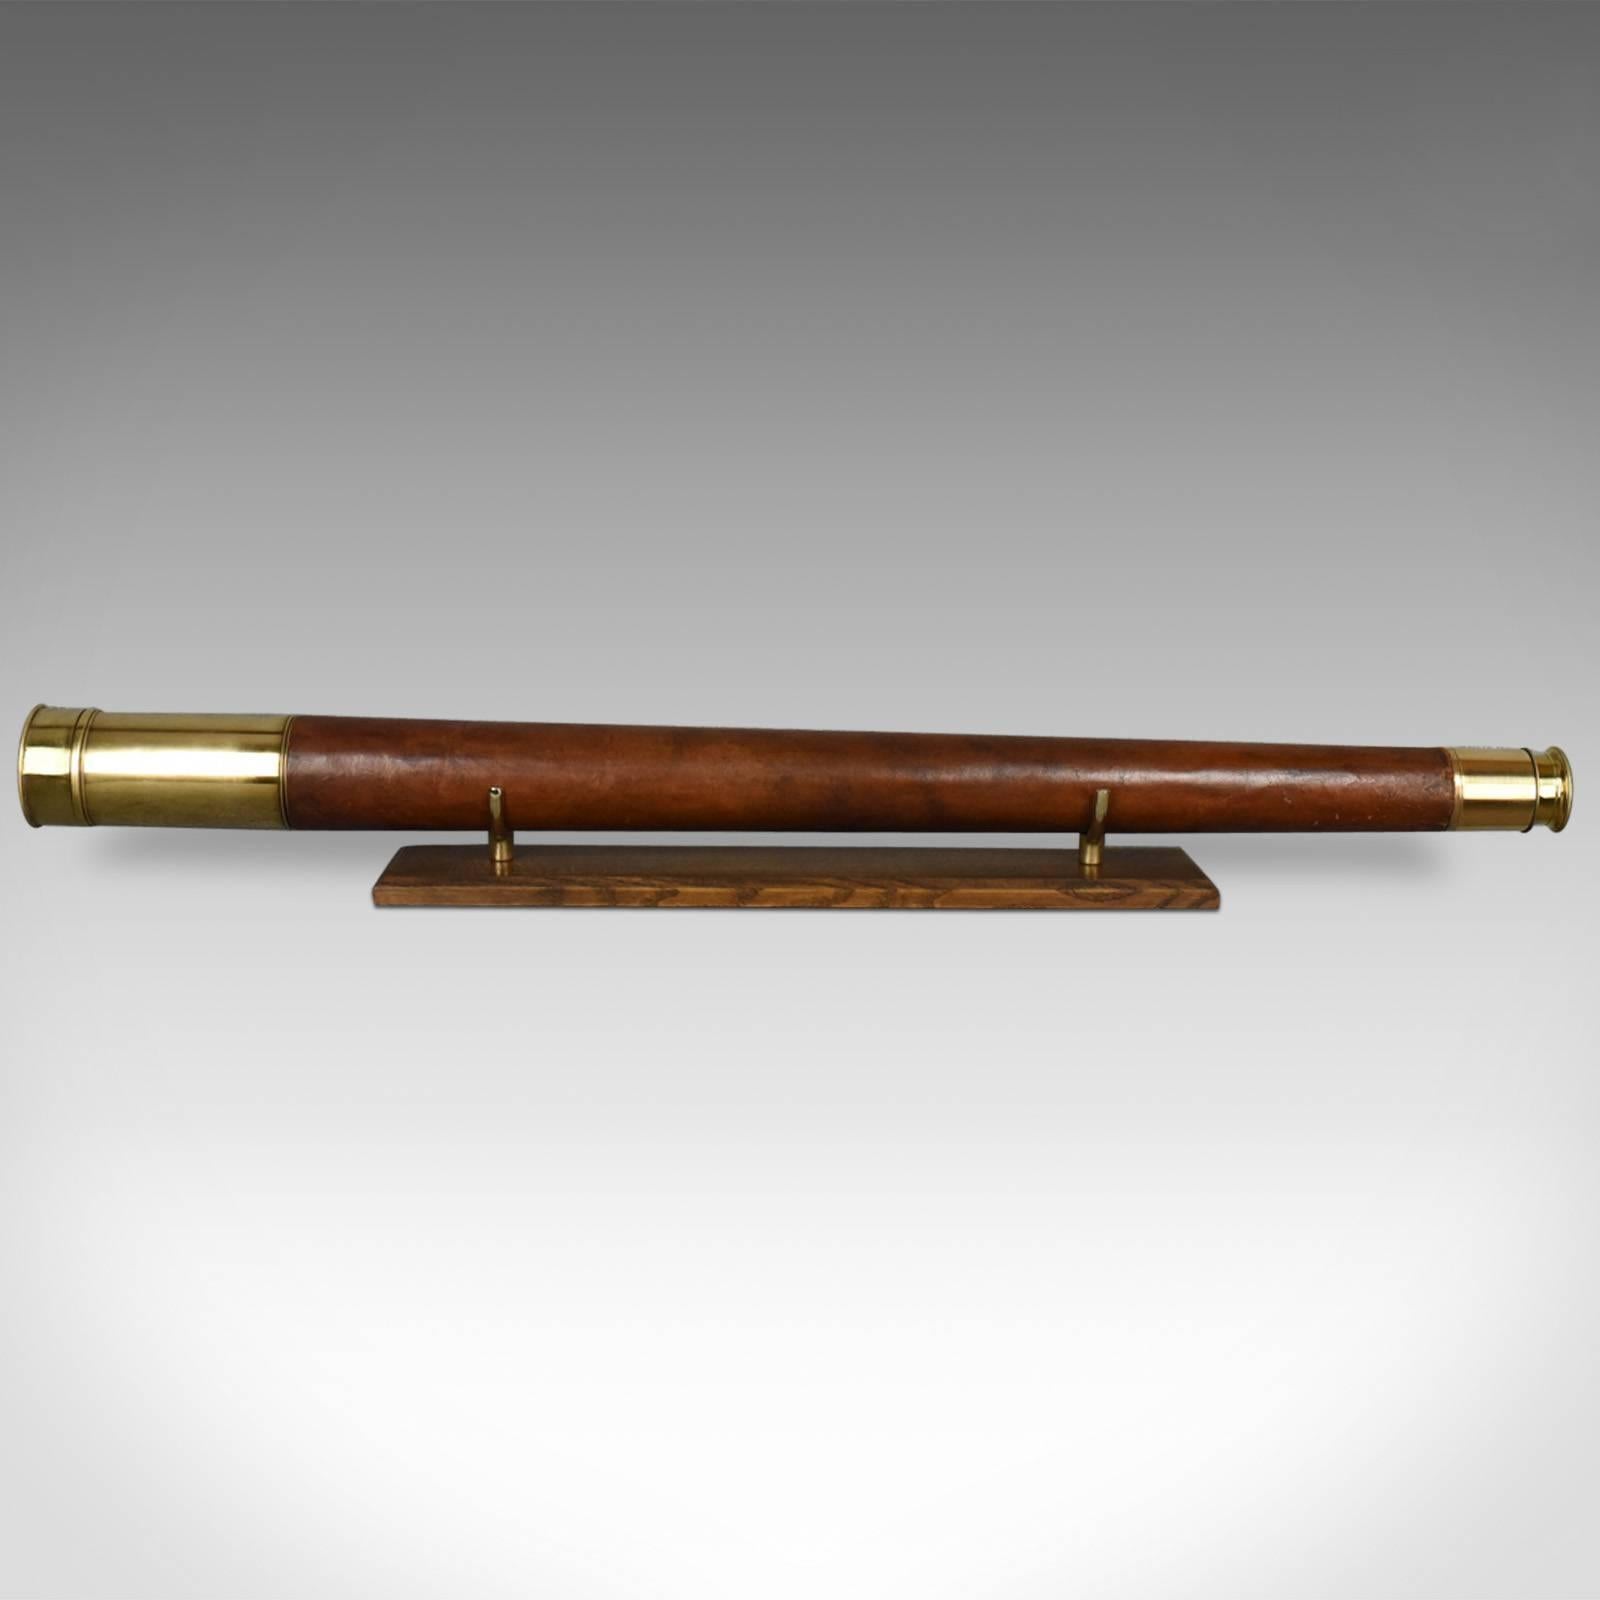 This is an antique telescope dating to the late 19th century, 1899.

In fine order physically and optically
Upright image, ideal for terrestrial or astronomical use
Delivered with a solid oak and brass, bespoke 'Captain's Stand'

Single draw